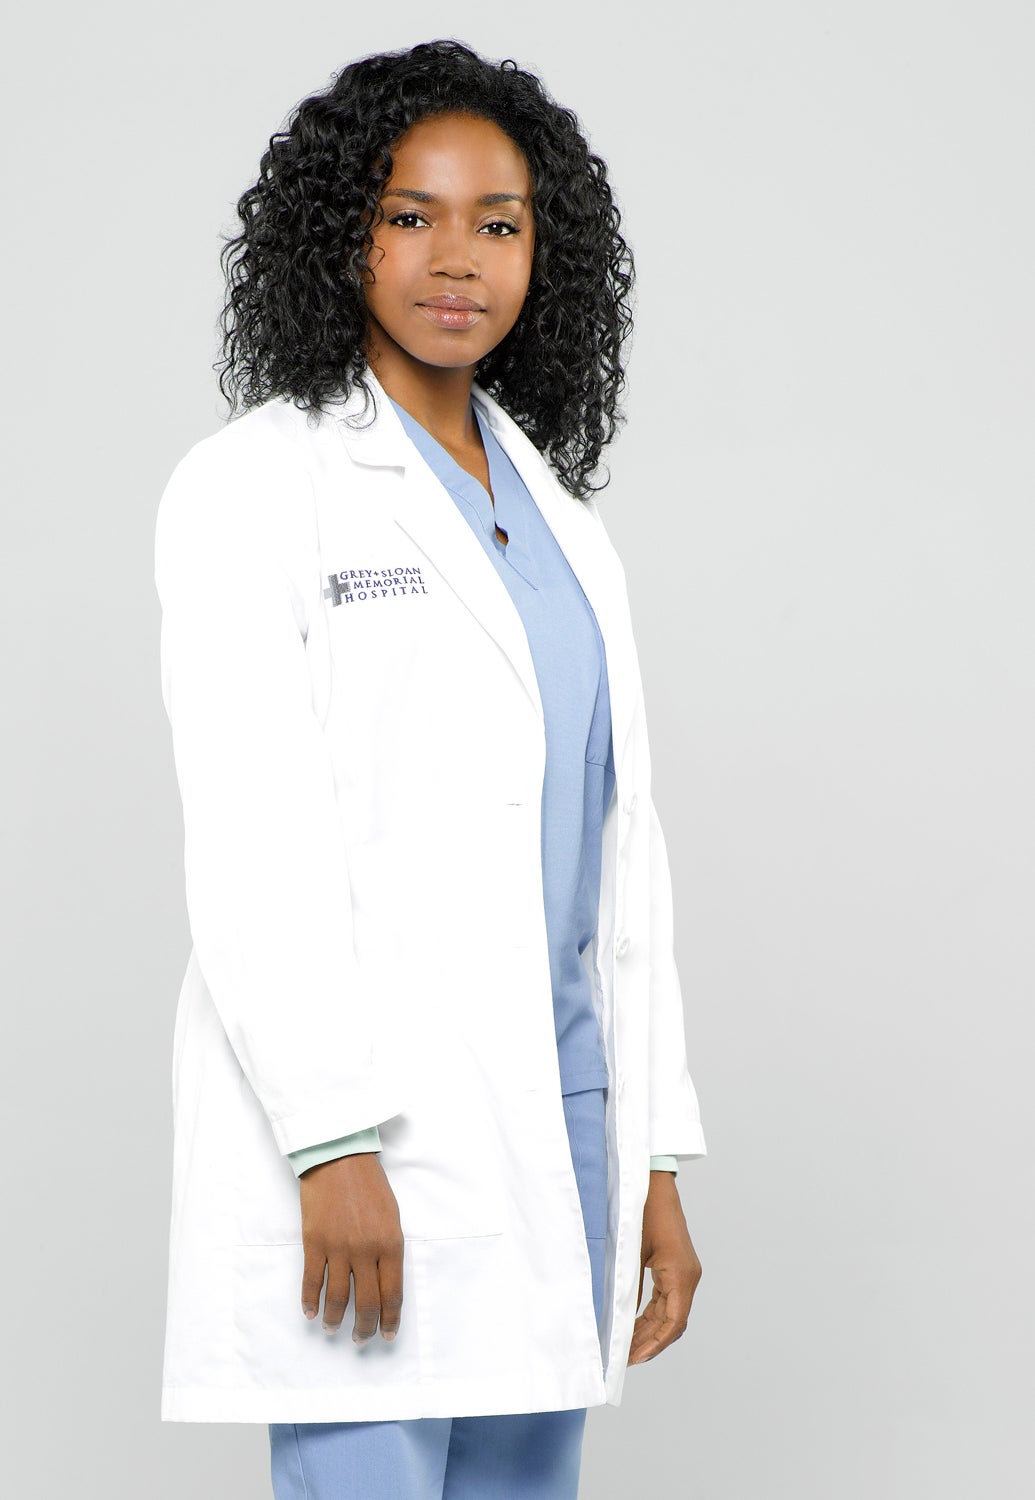 Boss Beauty Lessons From Shondaland